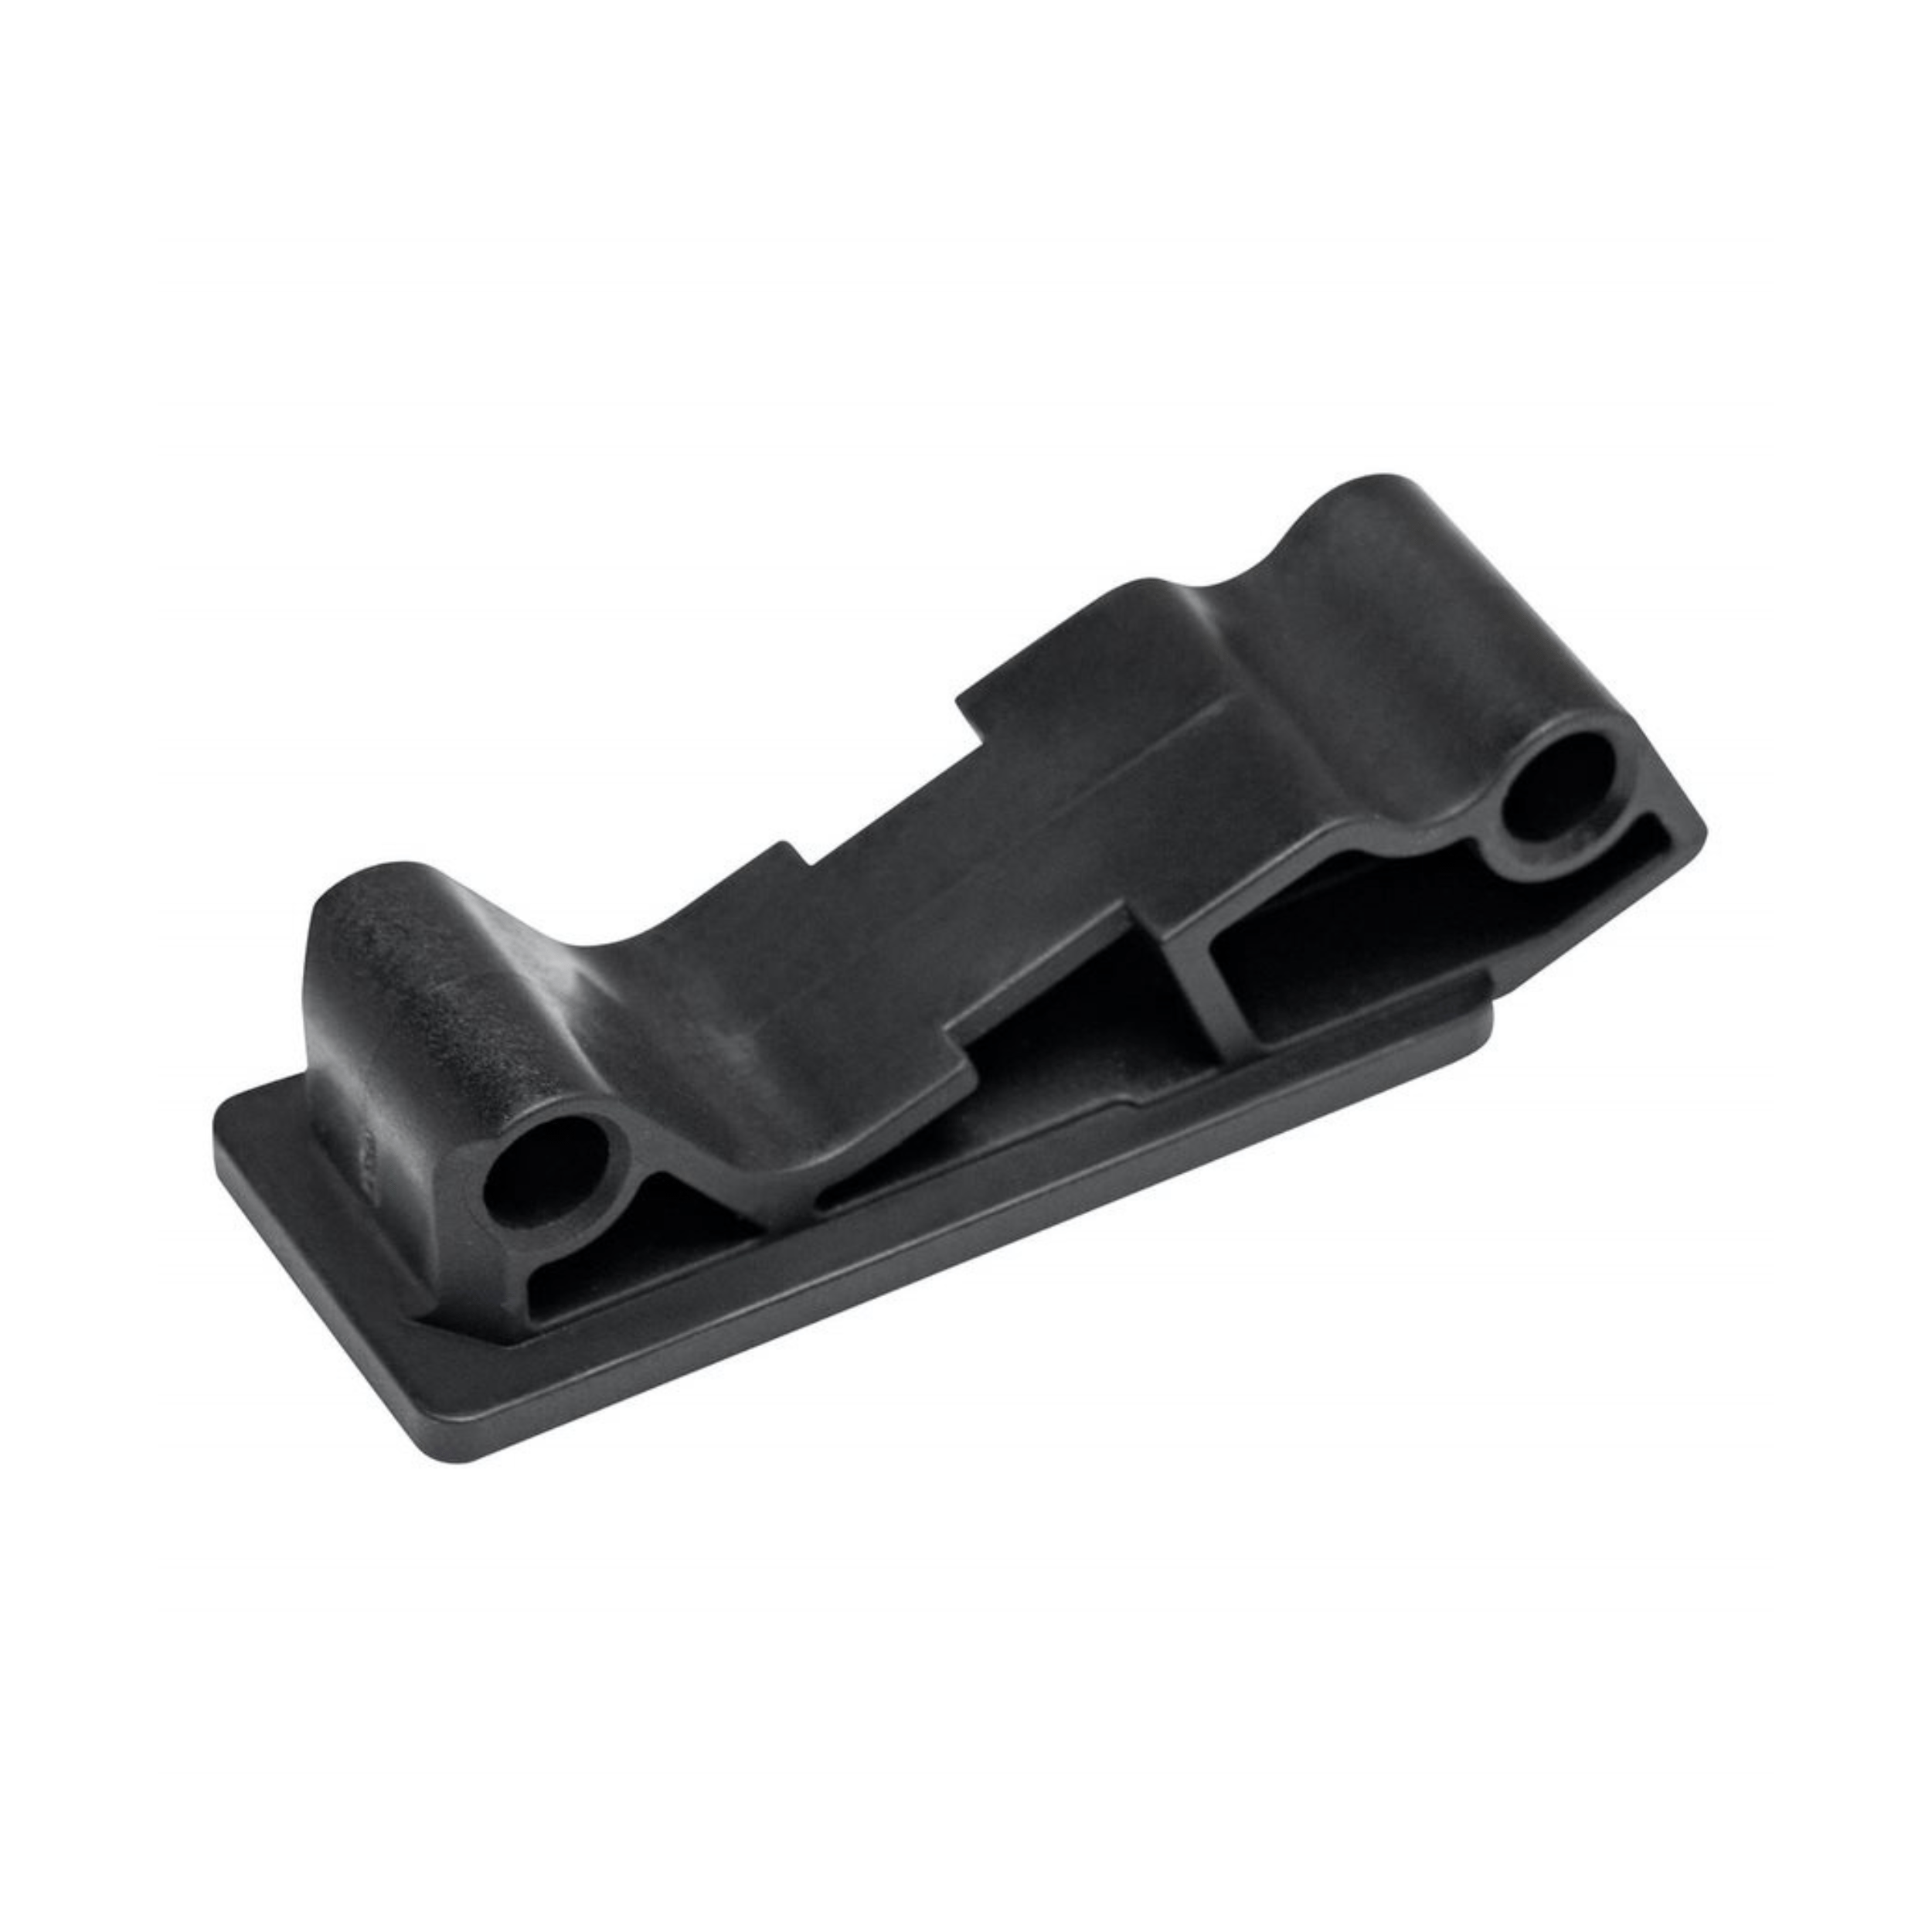 Connection plate housing .22lr